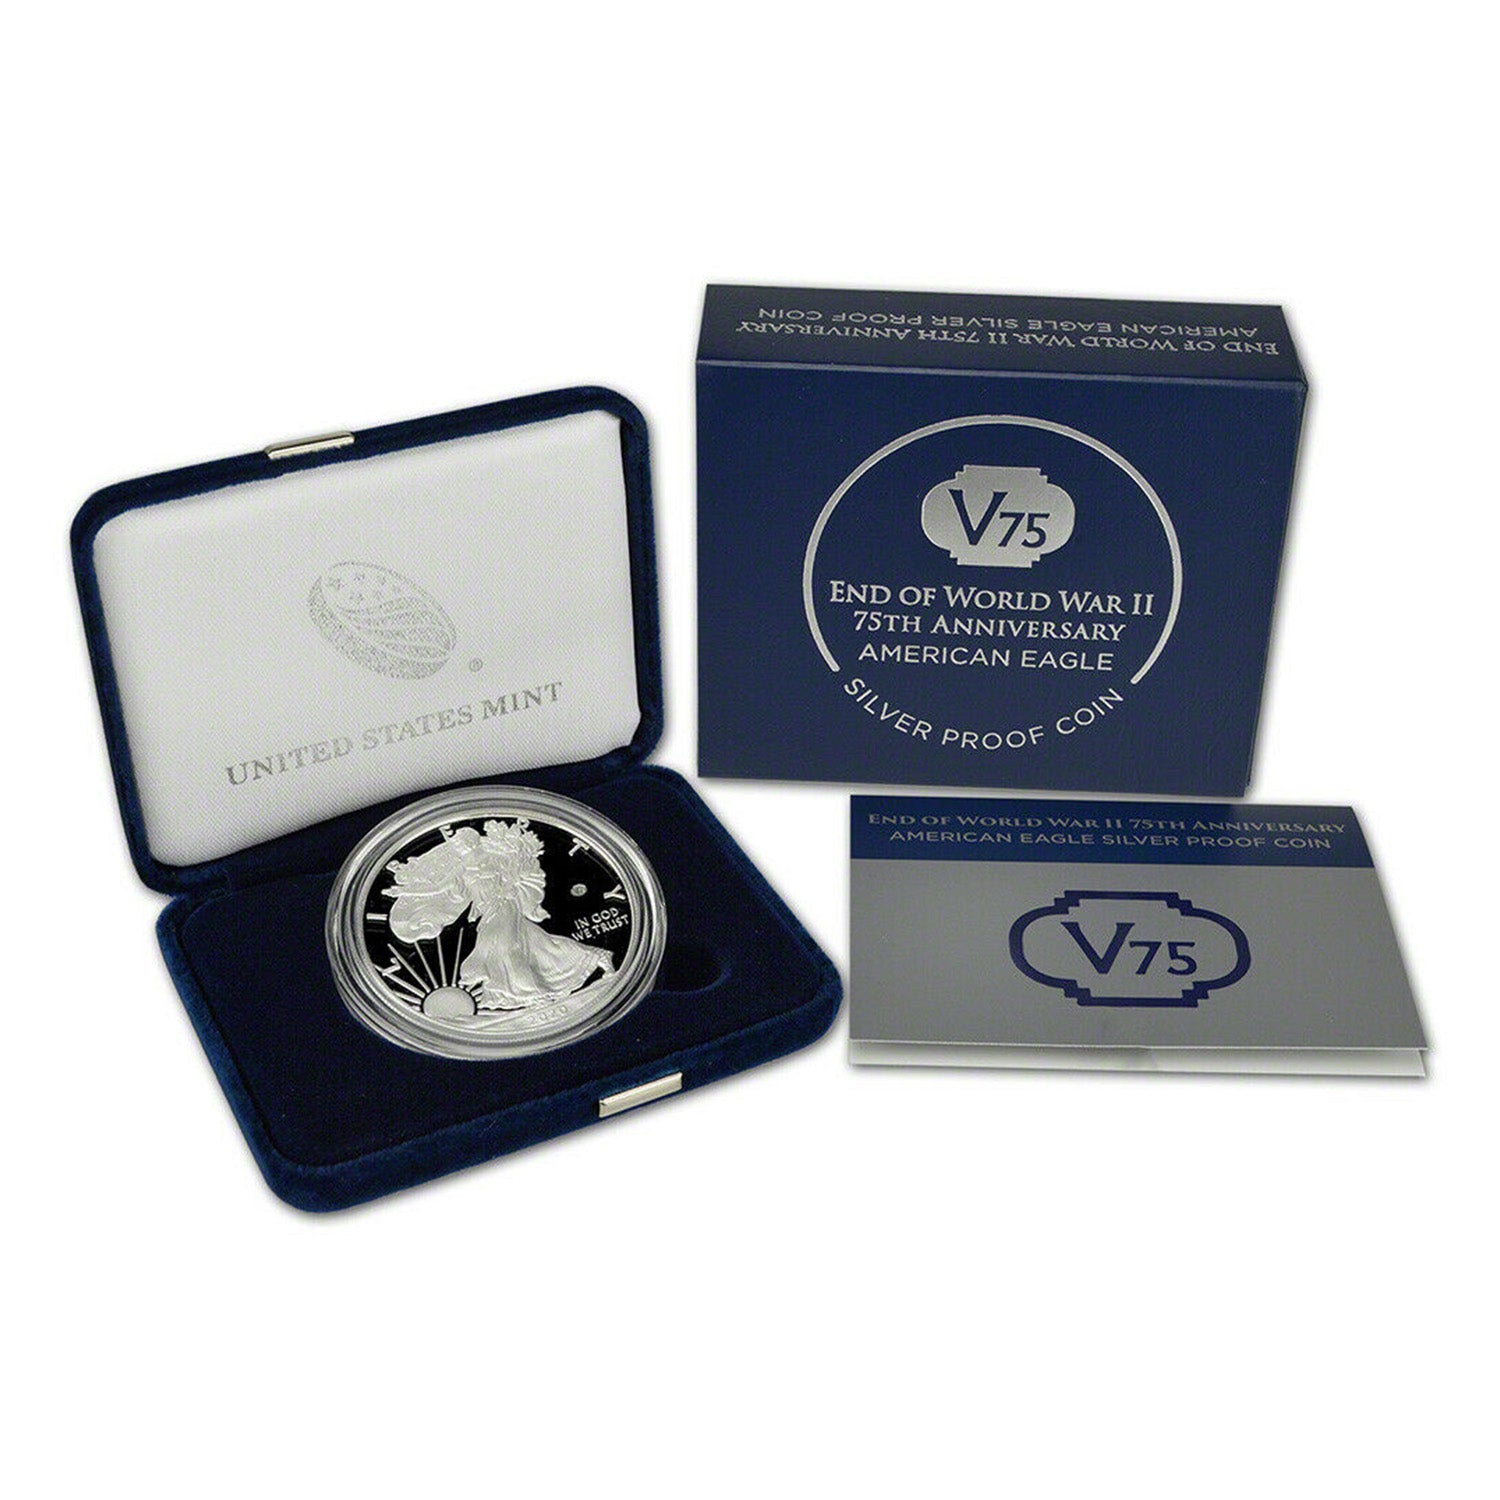 2020-W American Silver Eagle End of World War II v75 75th Anniversary Proof in OGP